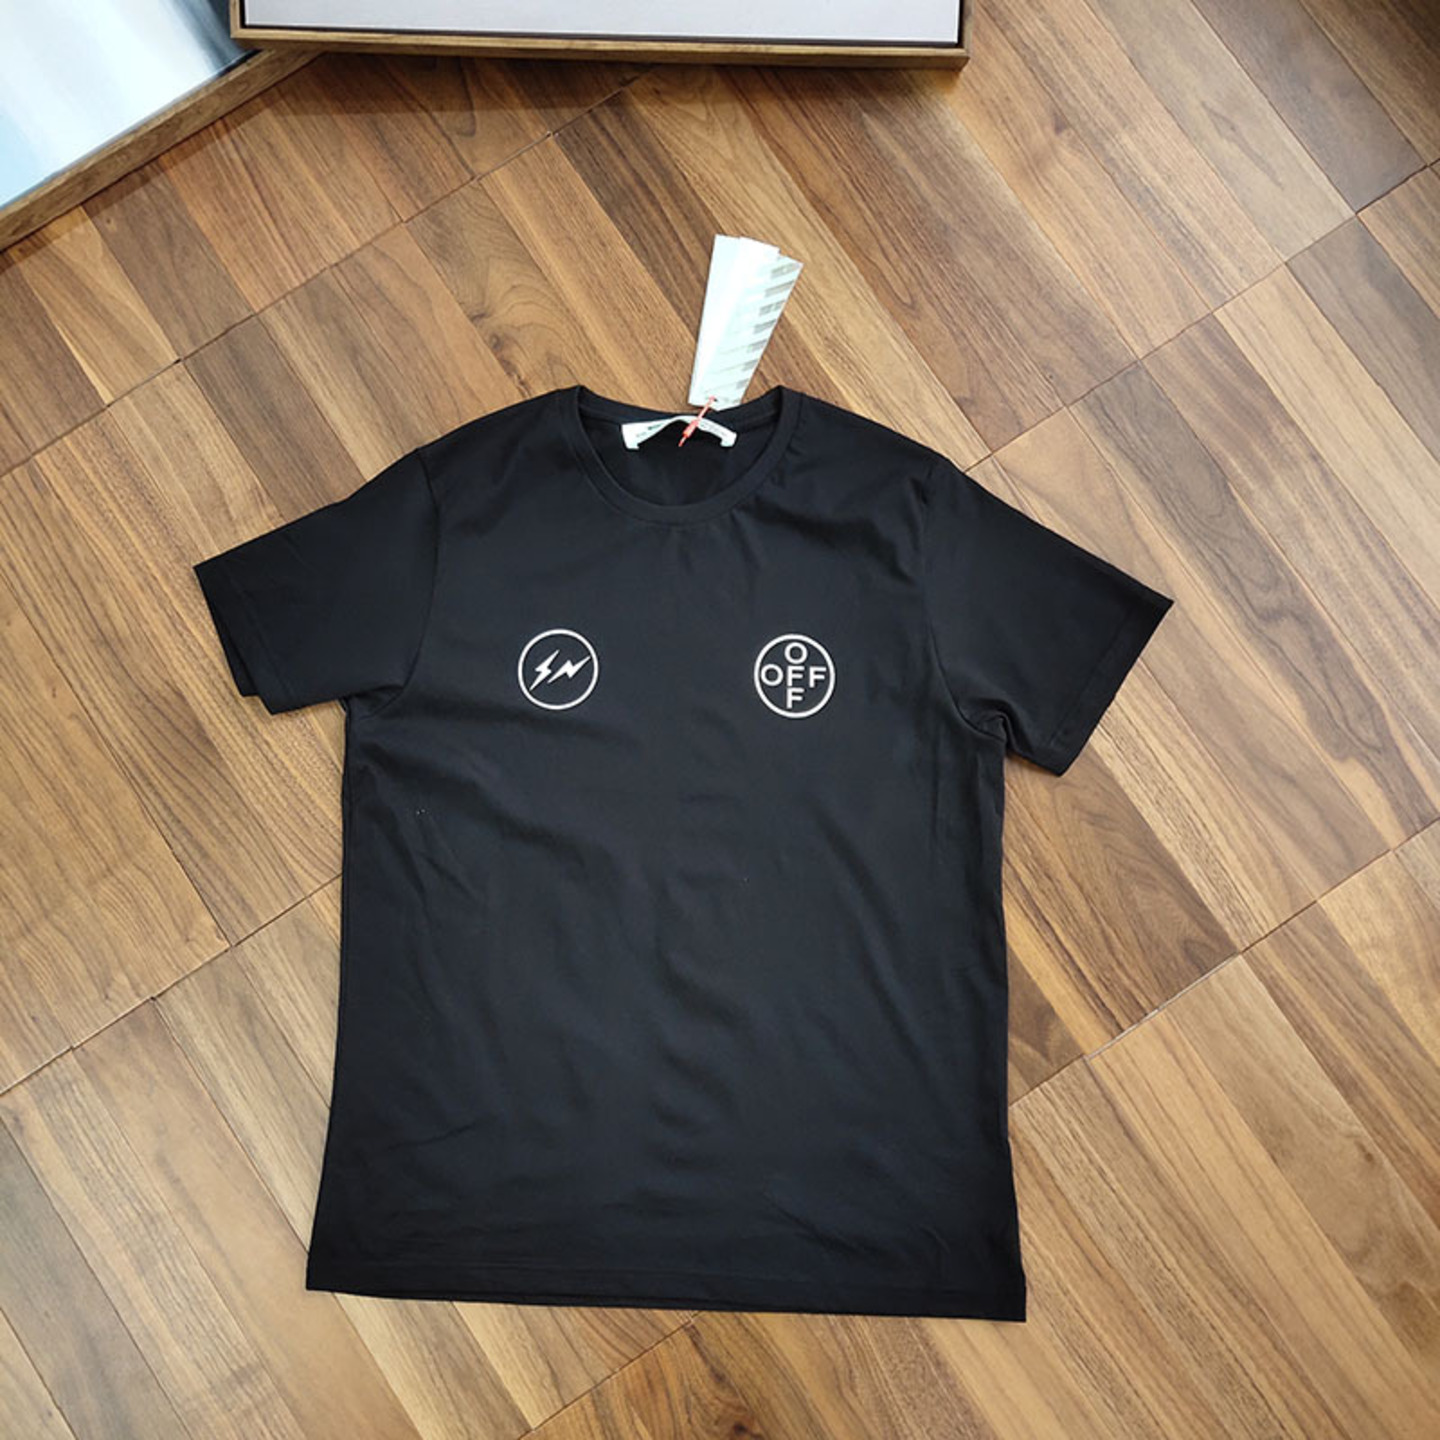 Off-White x Fragment Design Cereal T-Shirt